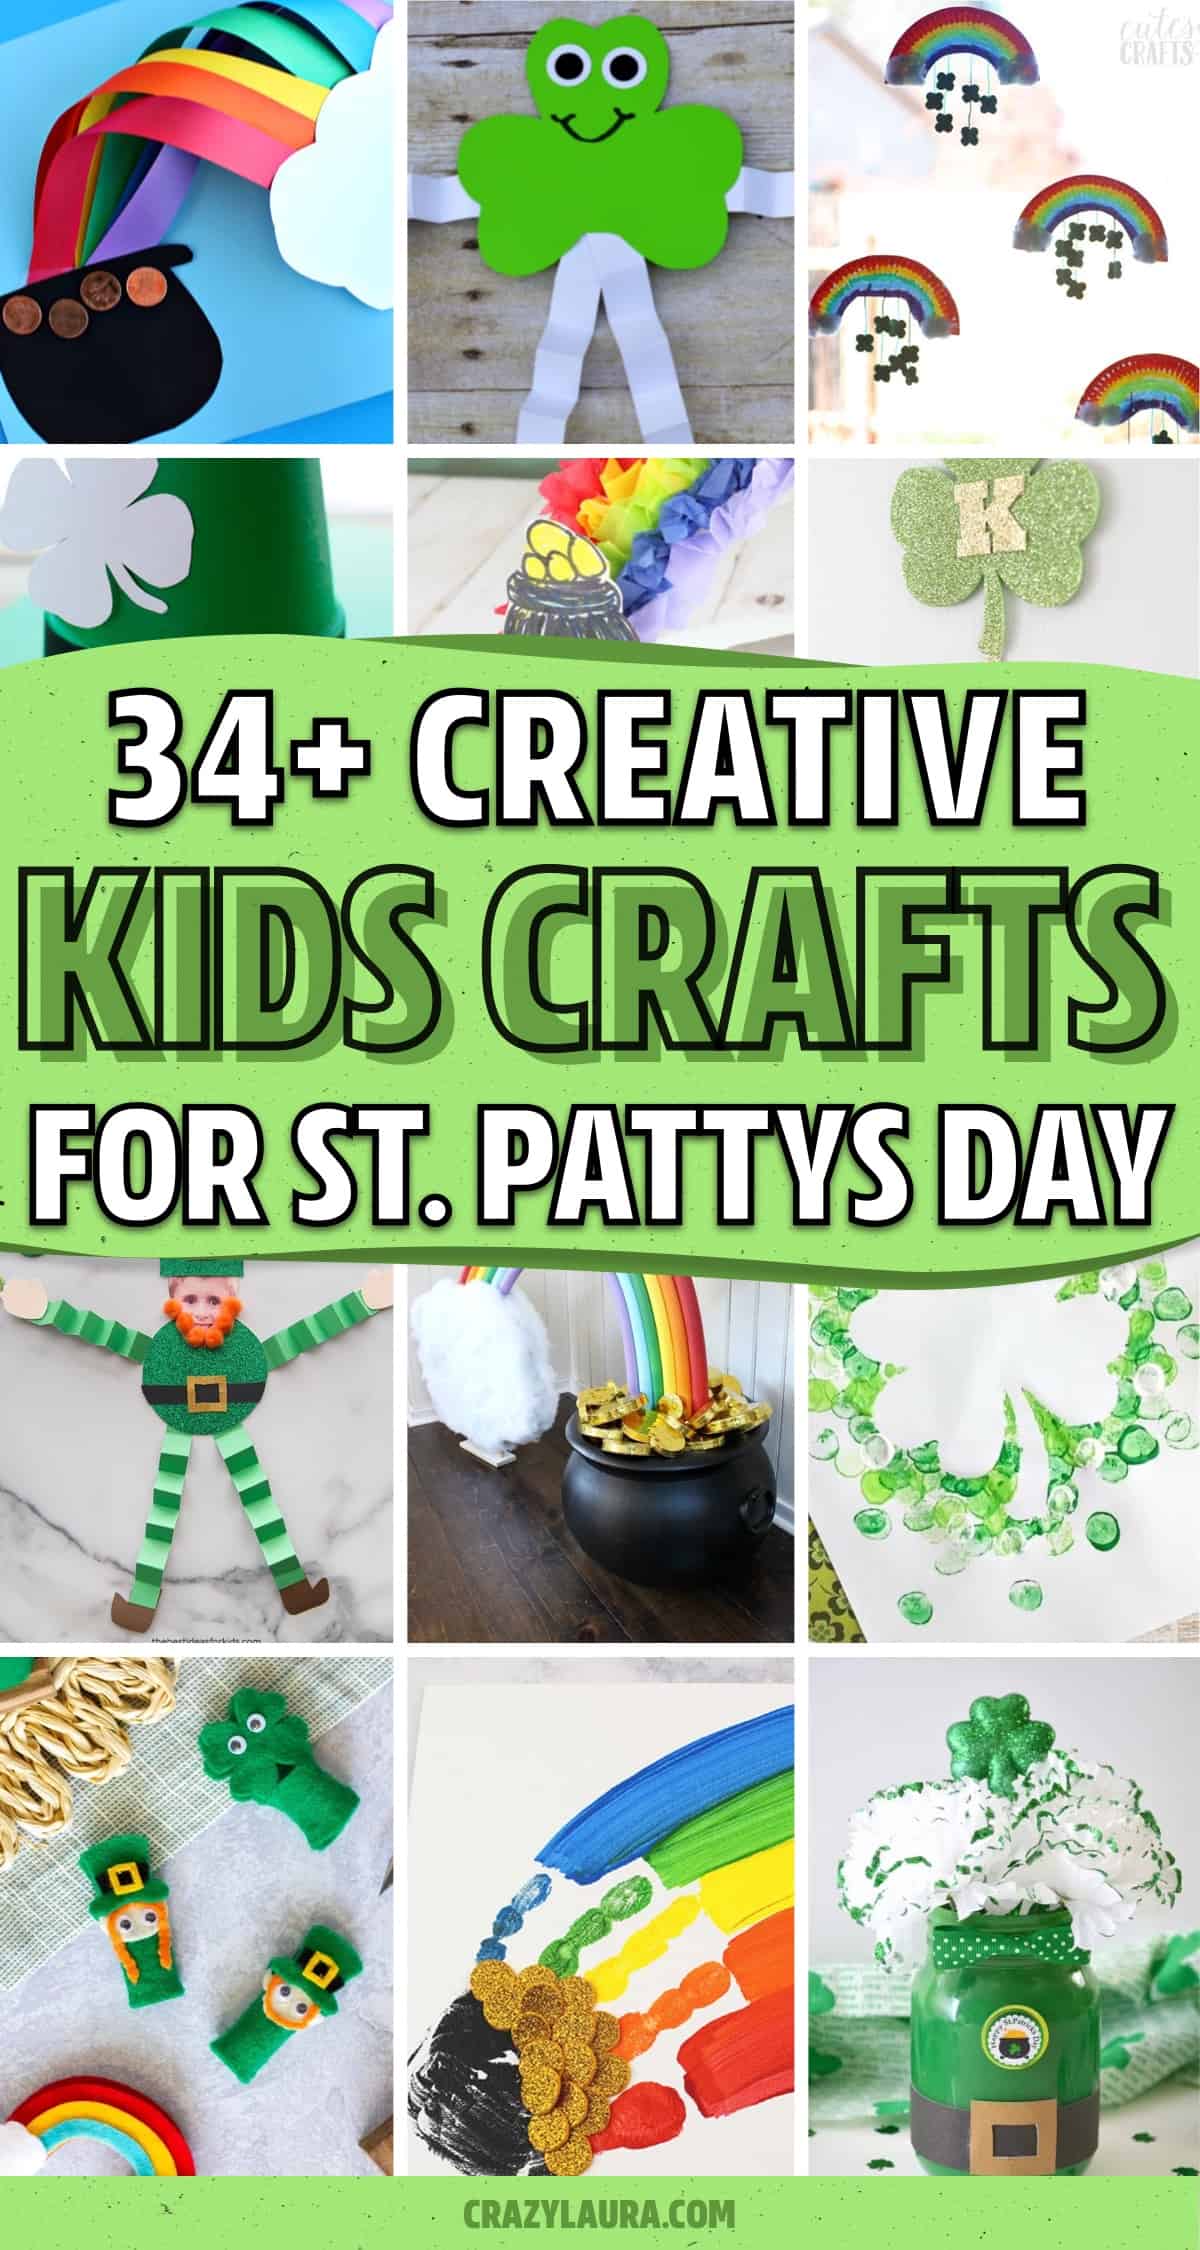 super cute crafts for the luck of the irish